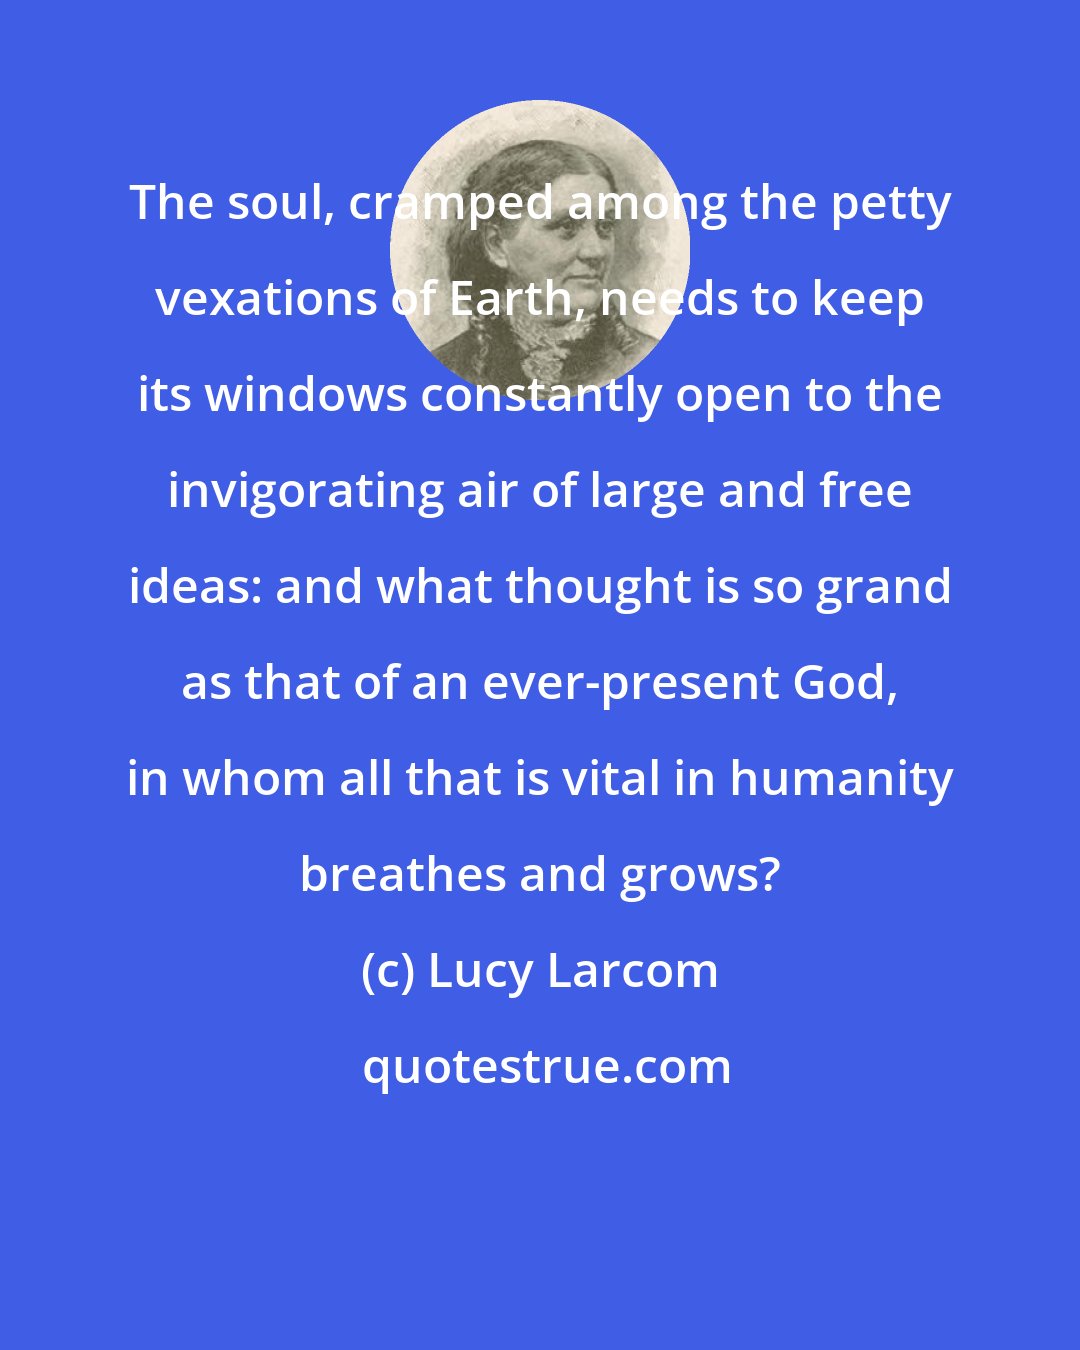 Lucy Larcom: The soul, cramped among the petty vexations of Earth, needs to keep its windows constantly open to the invigorating air of large and free ideas: and what thought is so grand as that of an ever-present God, in whom all that is vital in humanity breathes and grows?